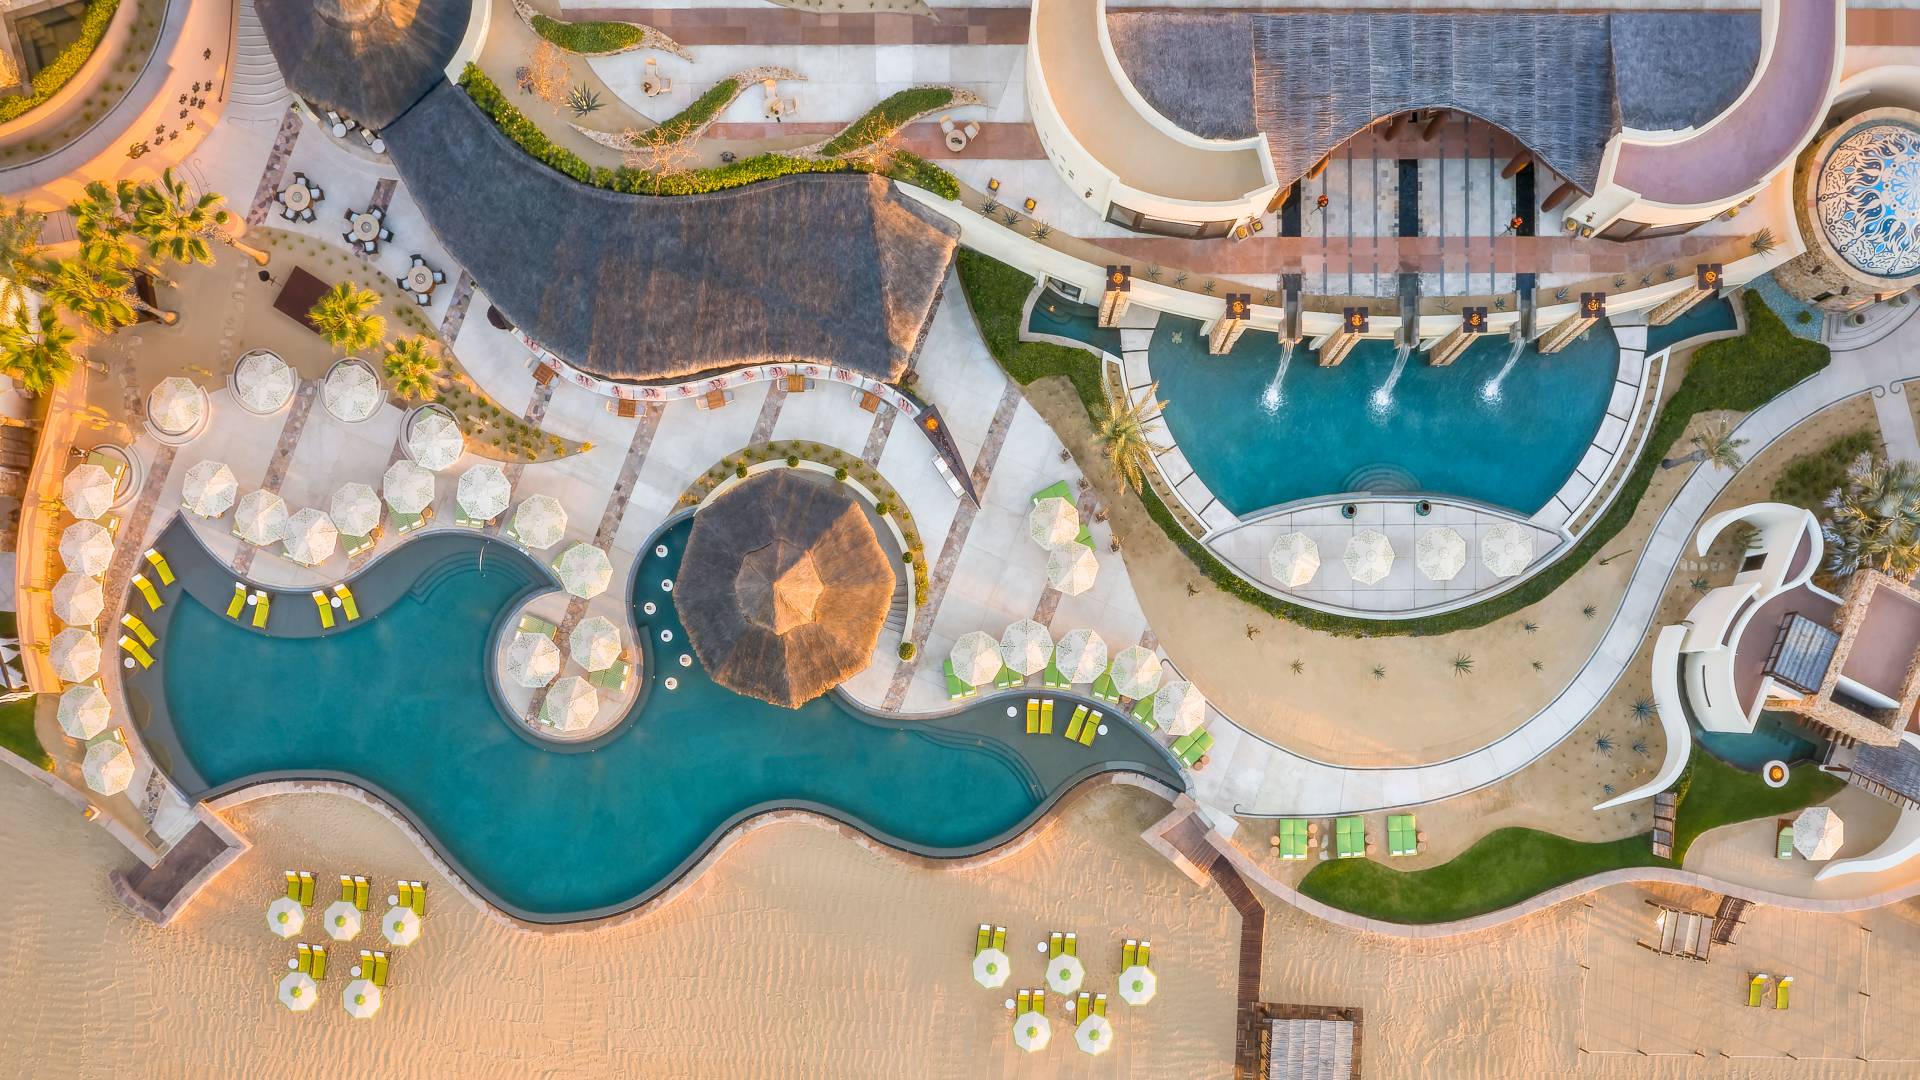 Arial View of Pool Area with Bar